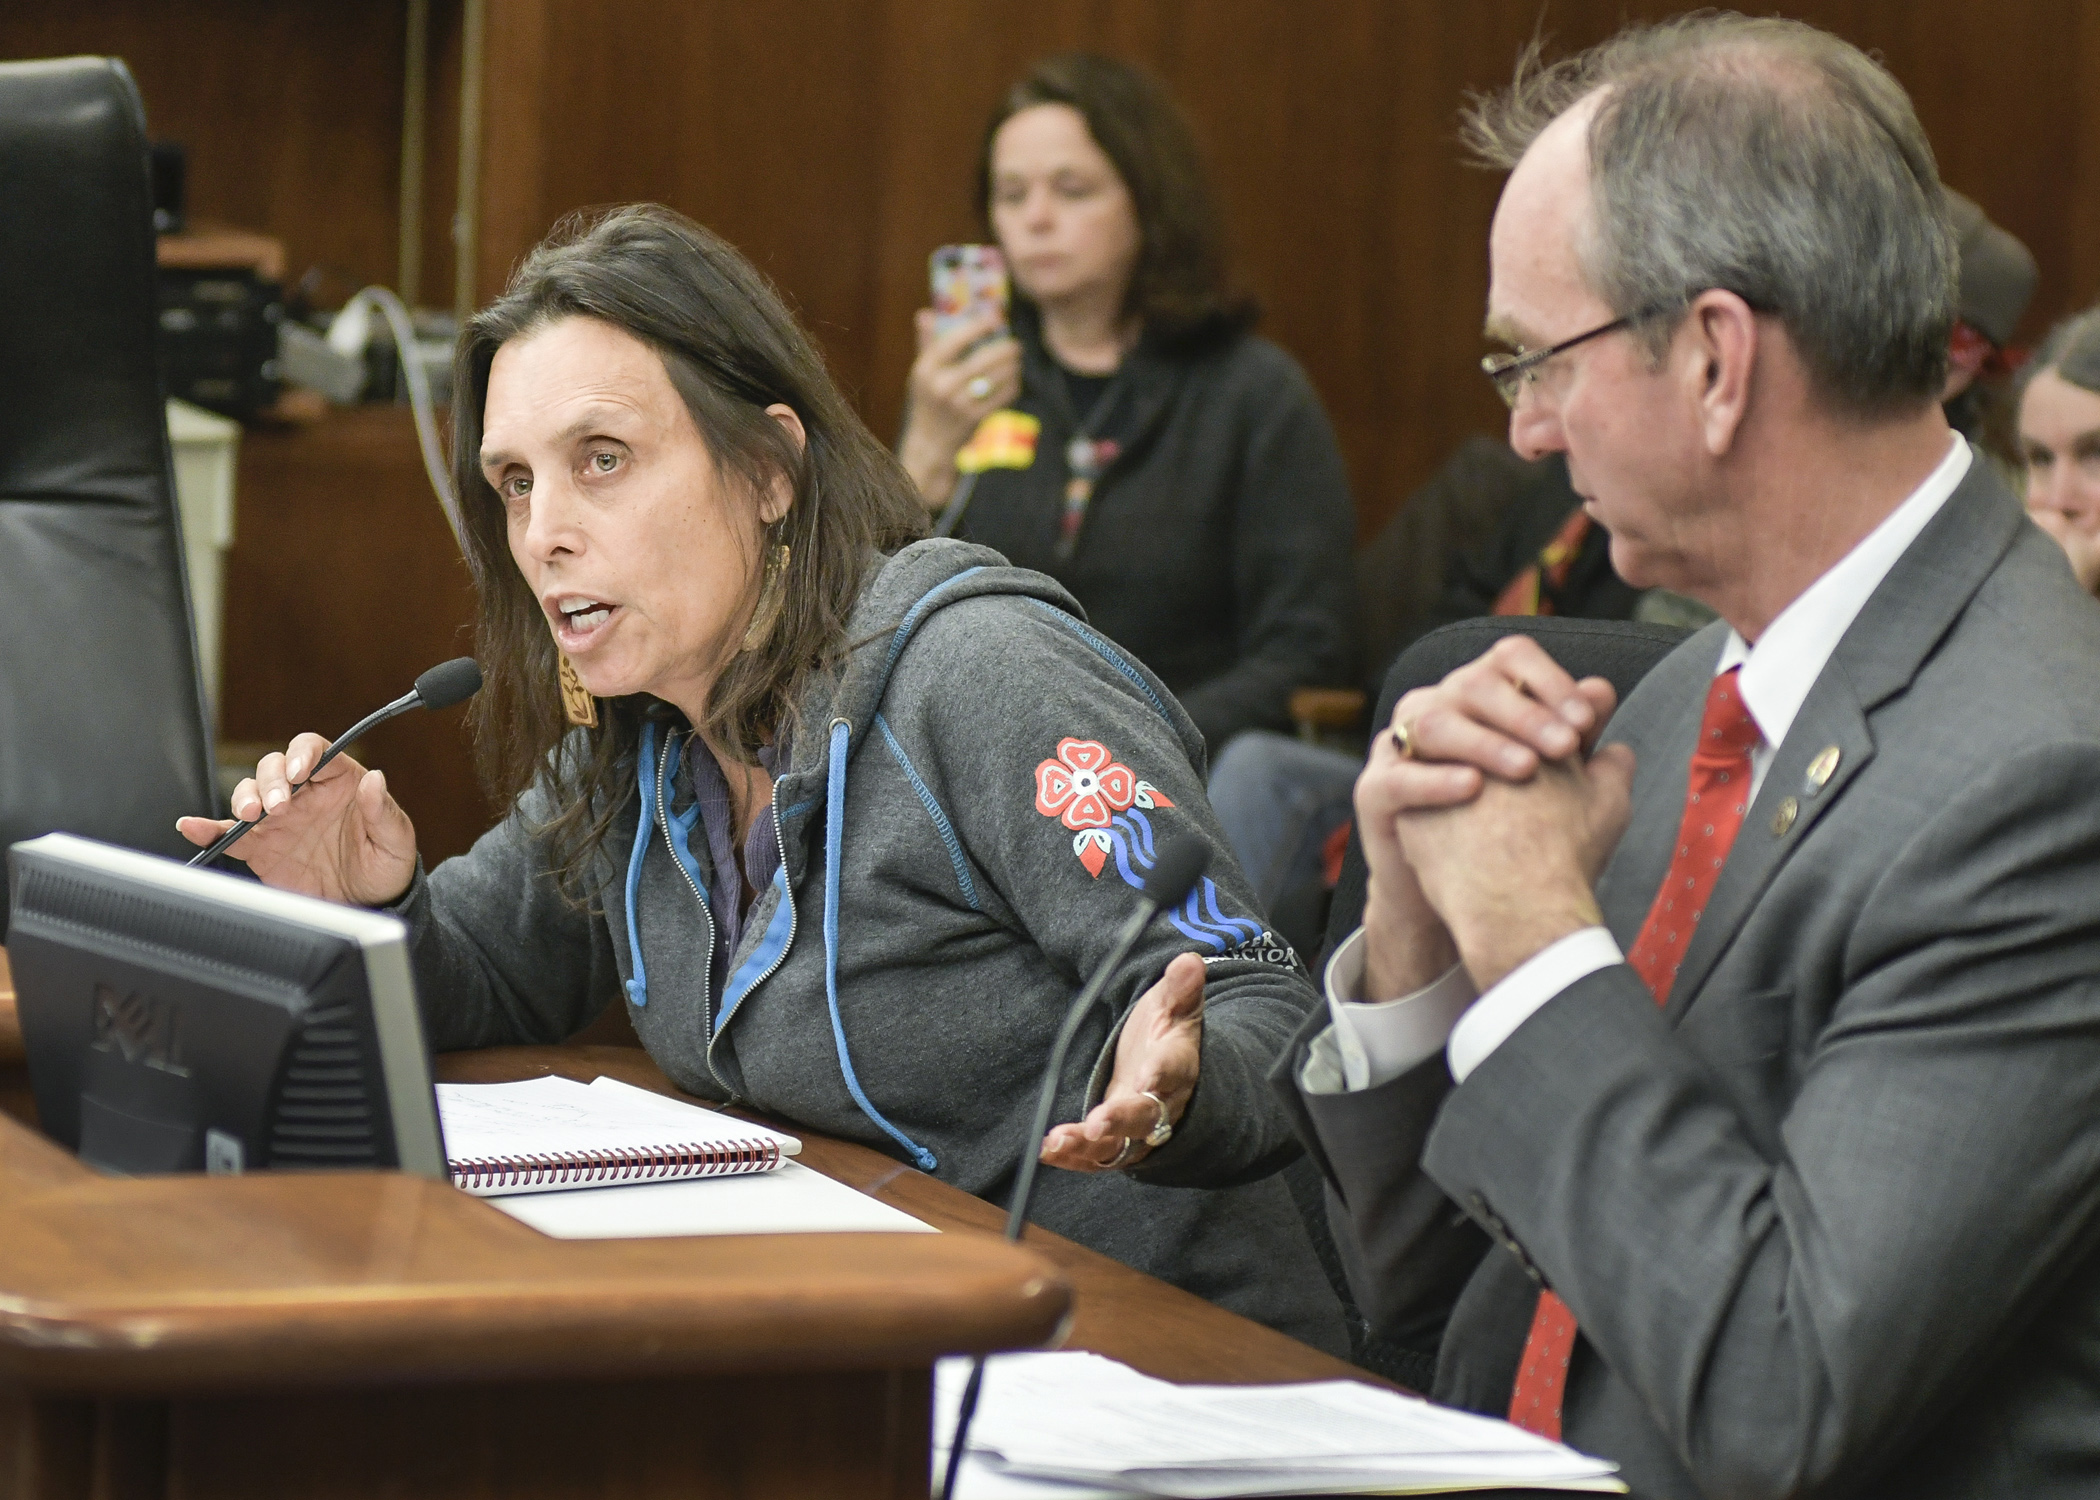 Environmentalist Winona LaDuke testifies before the House Job Growth and Energy Affordability Policy and Finance Committee March 27 in opposition to a bill sponsored by Rep. Dan Fabian, right, that would authorize pipeline construction and routing. Photo by Andrew VonBank